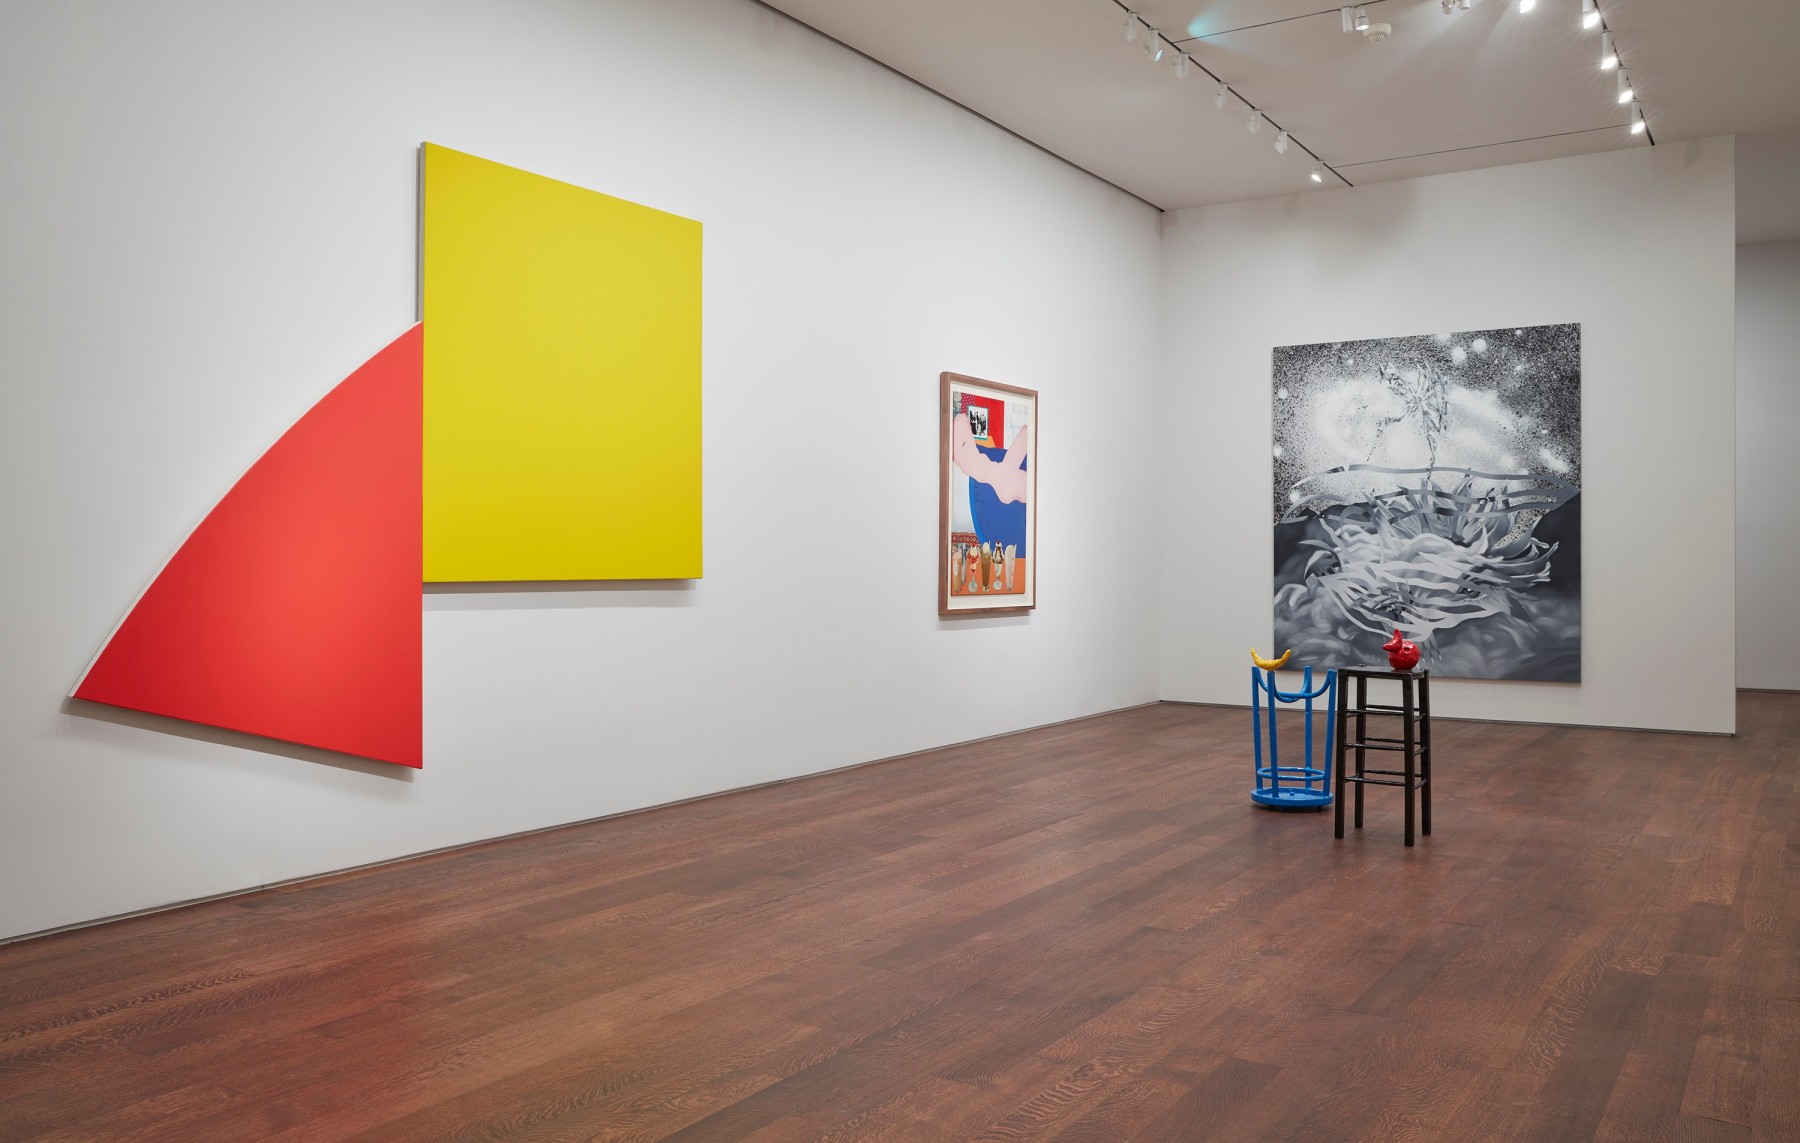 Ellsworth Kelly - Untitled (Red and Yellow), 1989 - Viewing Room - Acquavella Galleries Viewing Room